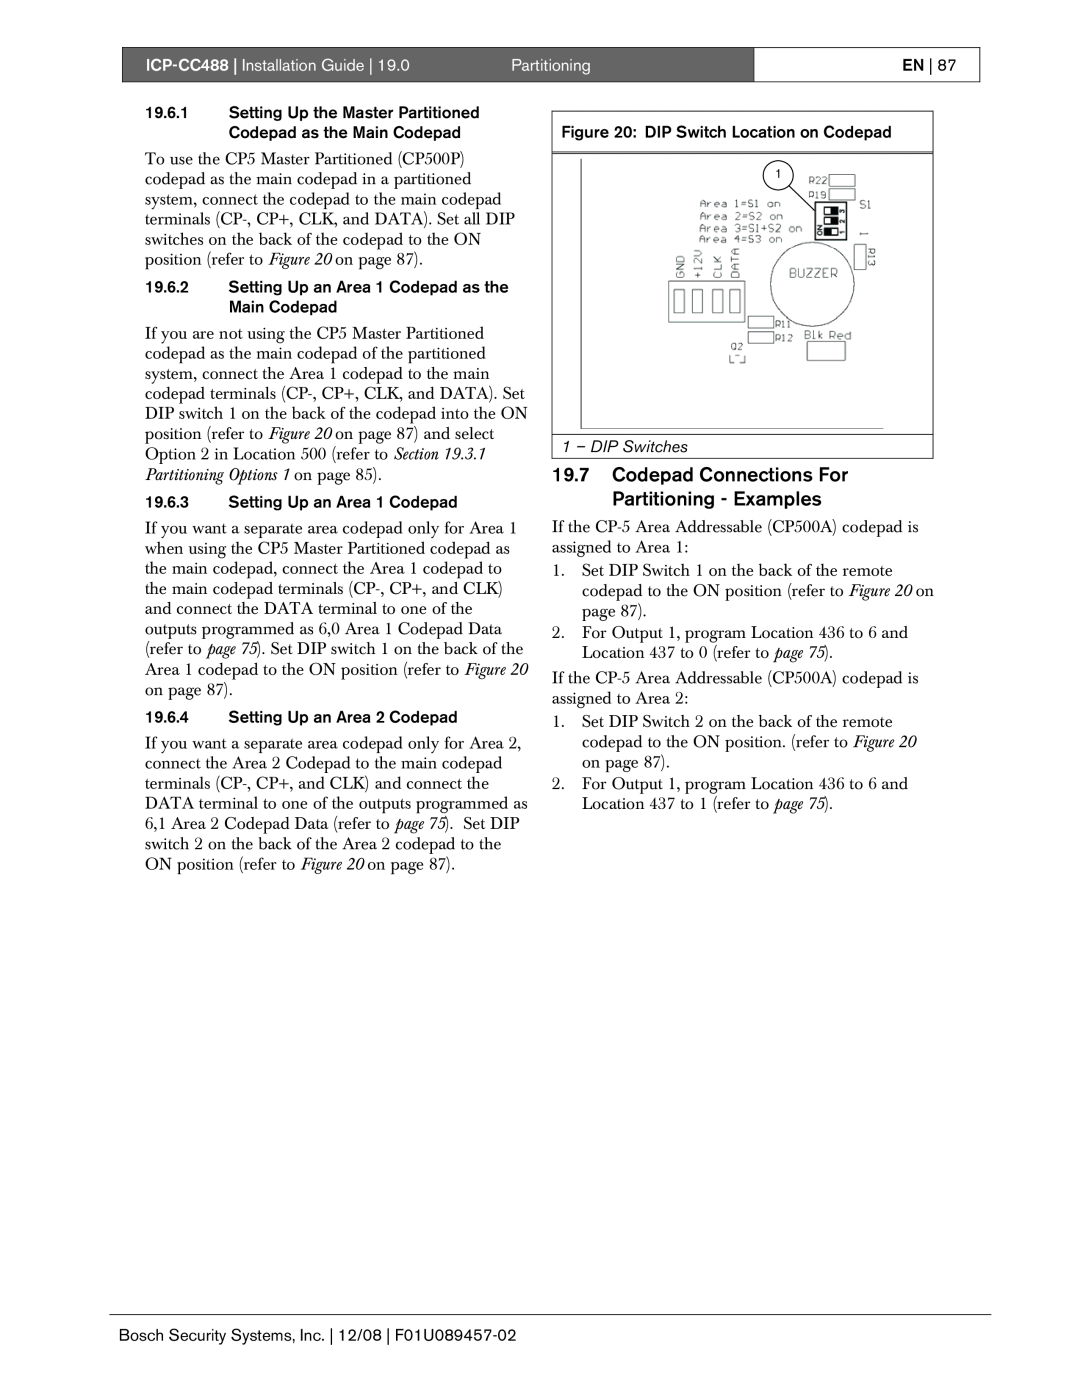 Bosch Appliances ICP-CC488| Installation Guide, Partitioning, En, 19.6.3Setting Up an Area 1 Codepad, 1 – DIP Switches 